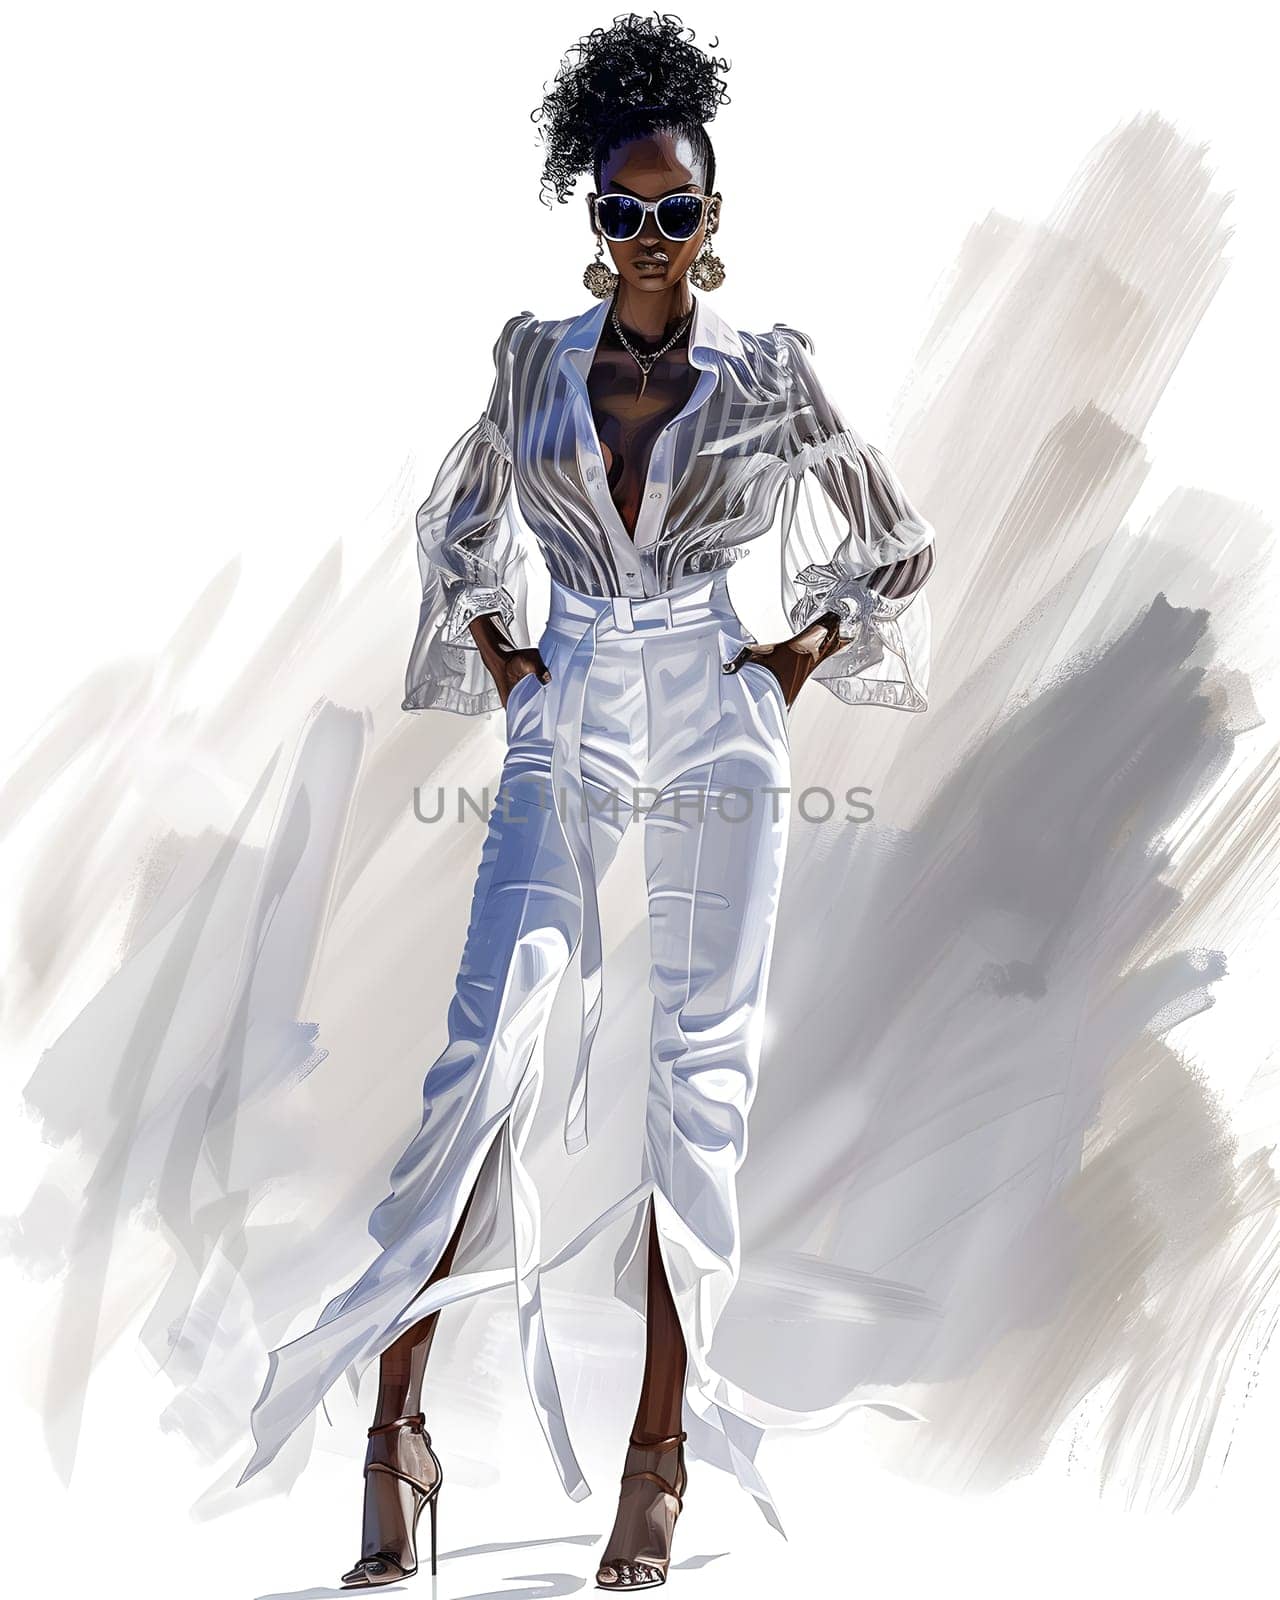 An art piece depicting a woman in a white dress and sunglasses, showcasing fashion design. The dress has intricate sleeve details and a collar, with the woman striking a stylish gesture